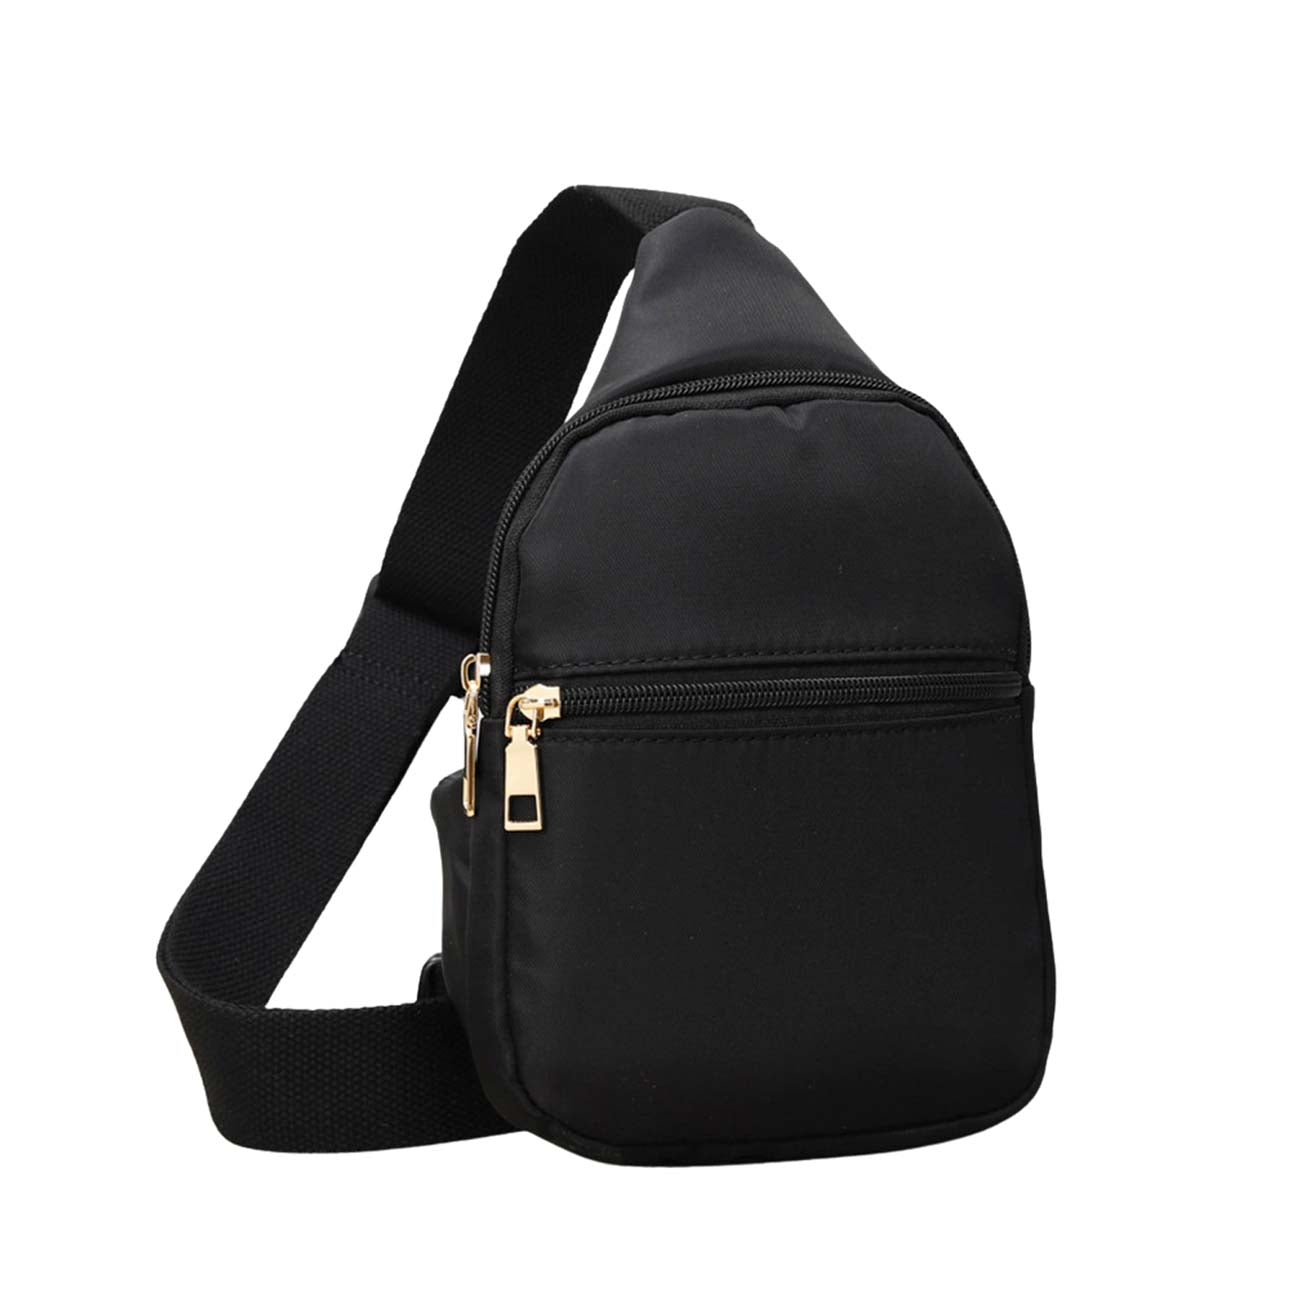 Black Solid Nylon Mini Sling Bag, be the ultimate fashionista while carrying this Solid Nylon Mini Sling bag in style. It's great for carrying small and handy things. Keep your keys handy & ready for opening doors as soon as you arrive. The adjustable lightweight features room to carry what you need for those longer walks or trips.